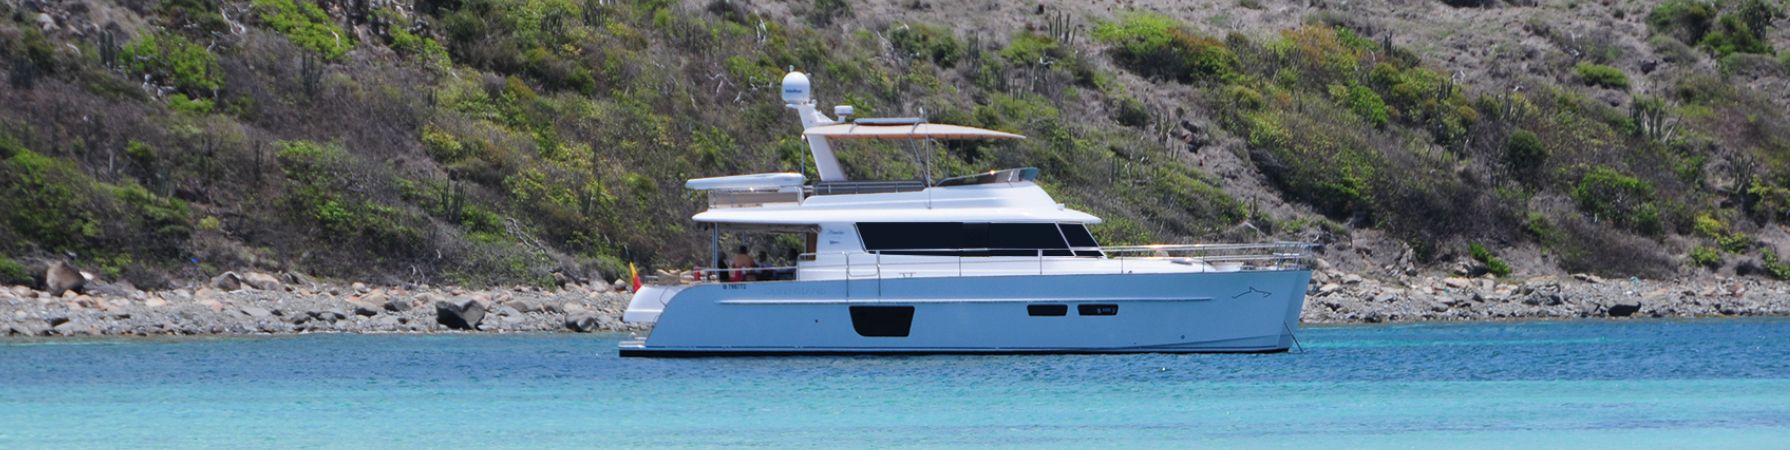 Fountaine Pajot Queensland 55 4+1 cab Main picture for the desktop